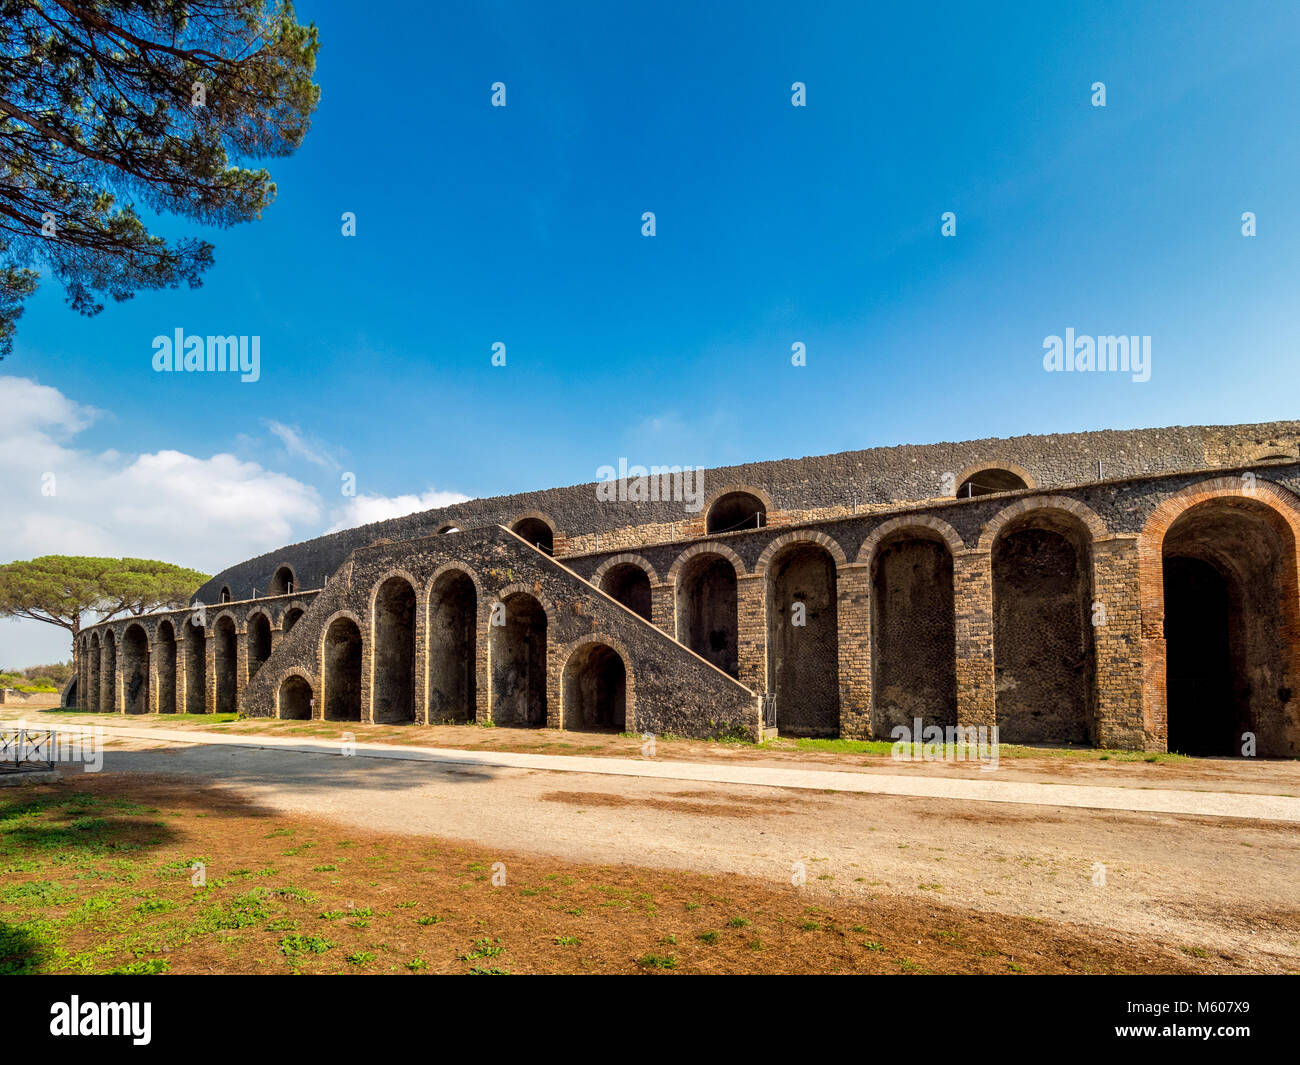 Amphitheatre of Pompeii. The oldest surviving Roman amphitheatre located in the ancient Roman city, buried by the eruption of Vesuvius Stock Photo